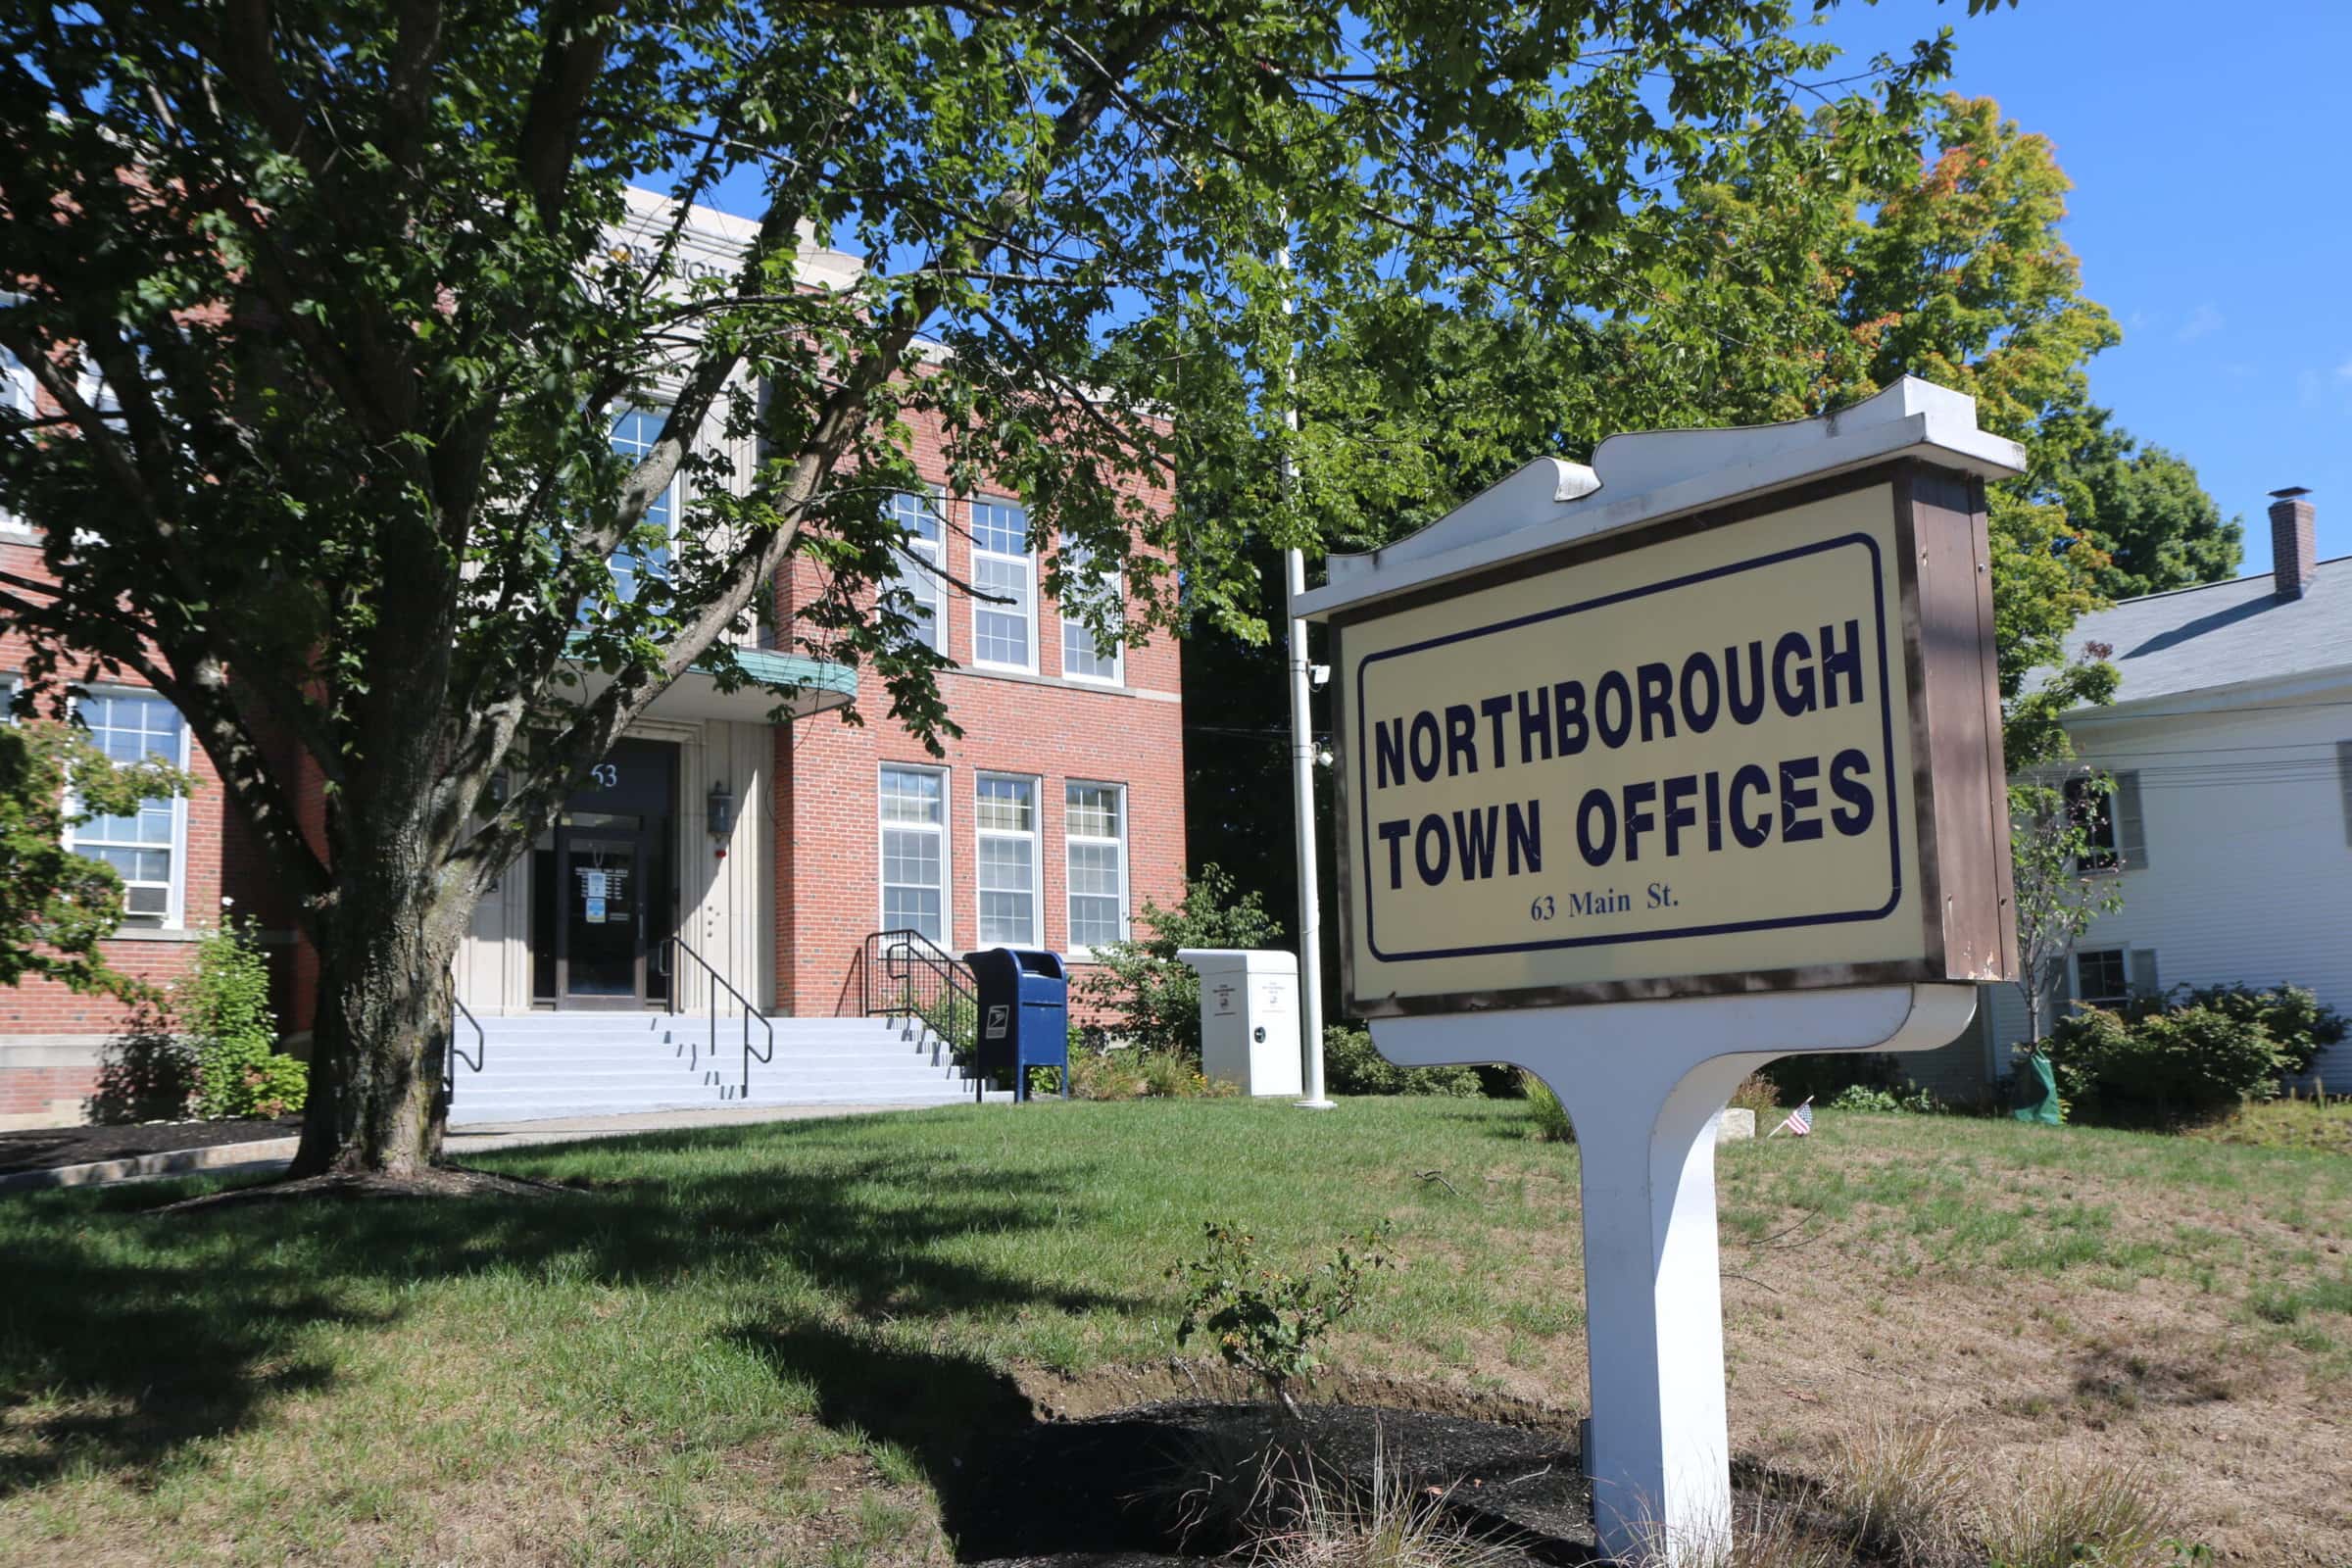 Northborough adopts single tax rate of $14.28